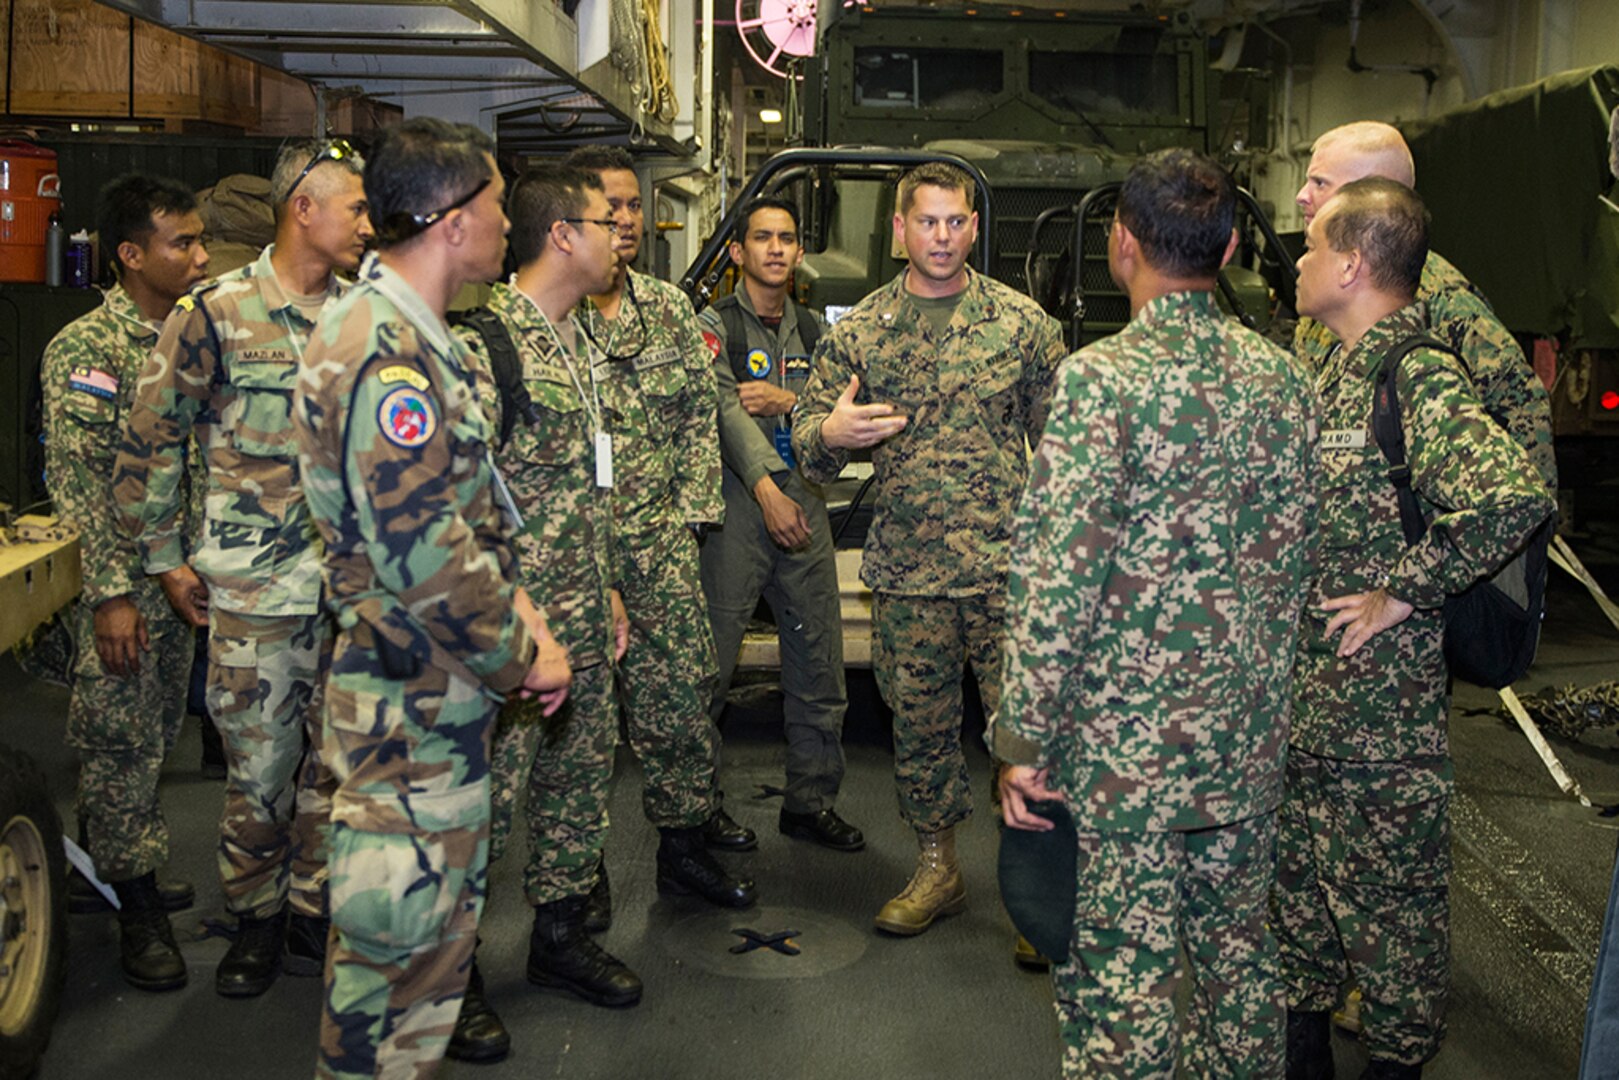 Marine Corps Chief Warrant Officer 2 Keith Challet, Combat Cargo Officer aboard the amphibious assault ship USS Makin Island (LHD 8), gives members of the Malaysian Armed Forces a tour of the ship’s upper vehicle storage during Tiger Strike 16.  Tiger Strike is a U.S.-Malaysia bilateral exercise designed to enhance interoperability, tactical proficiencies, and military-to-military partnership between participating forces. 